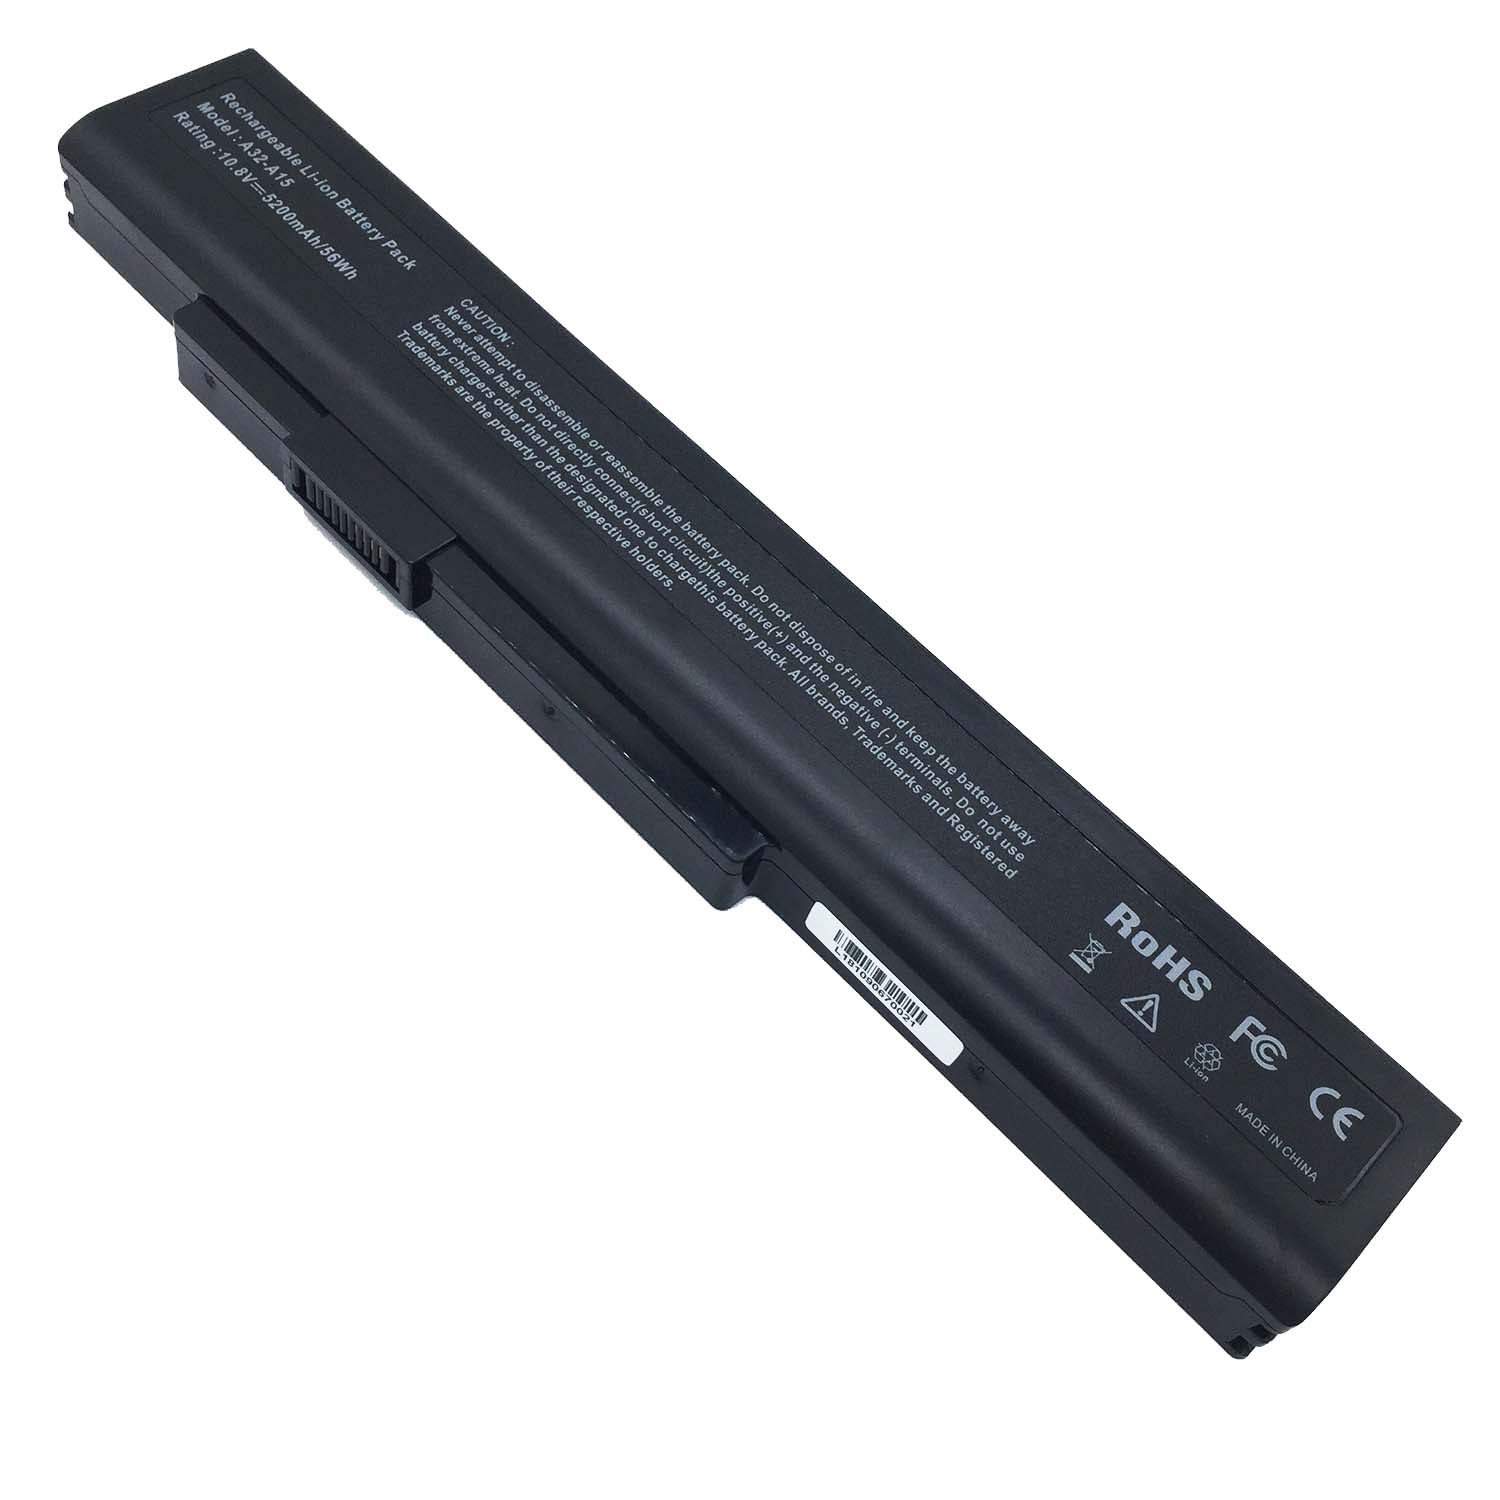 Replacement Battery for Medion Medion Akoya E6227 battery